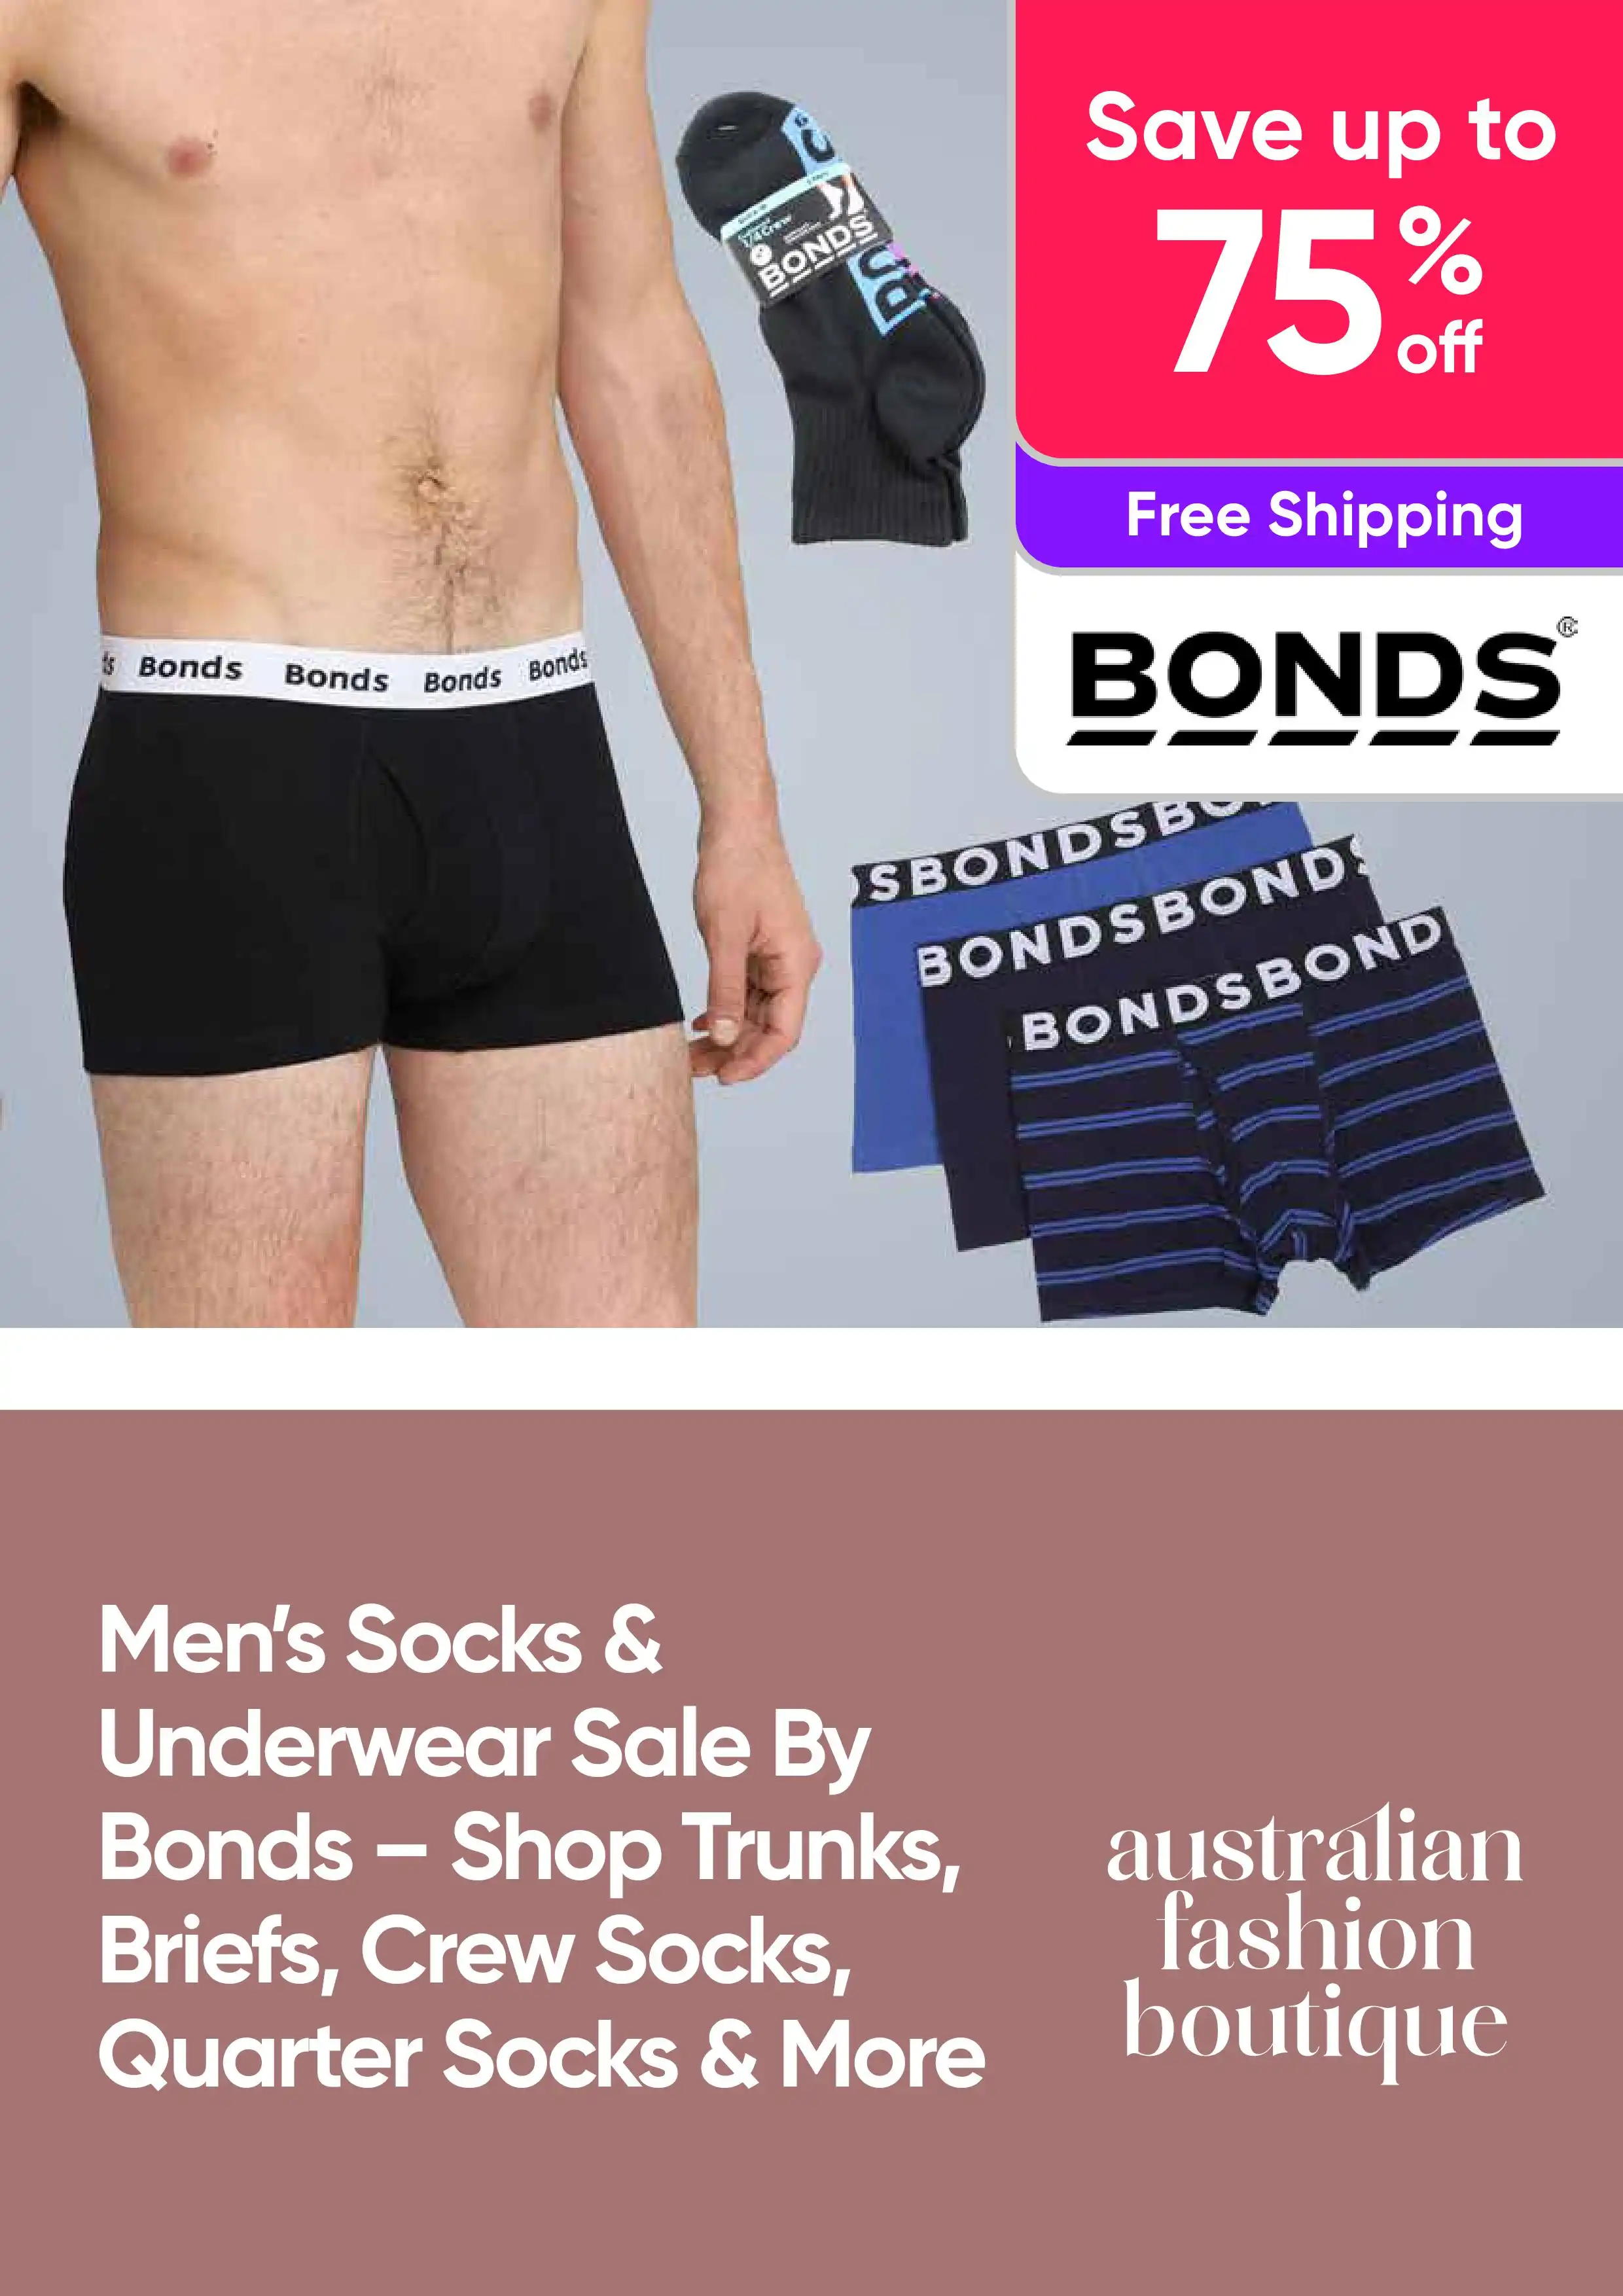 Mens Socks & Underwear Sale By Bonds - Save up to 75% Off